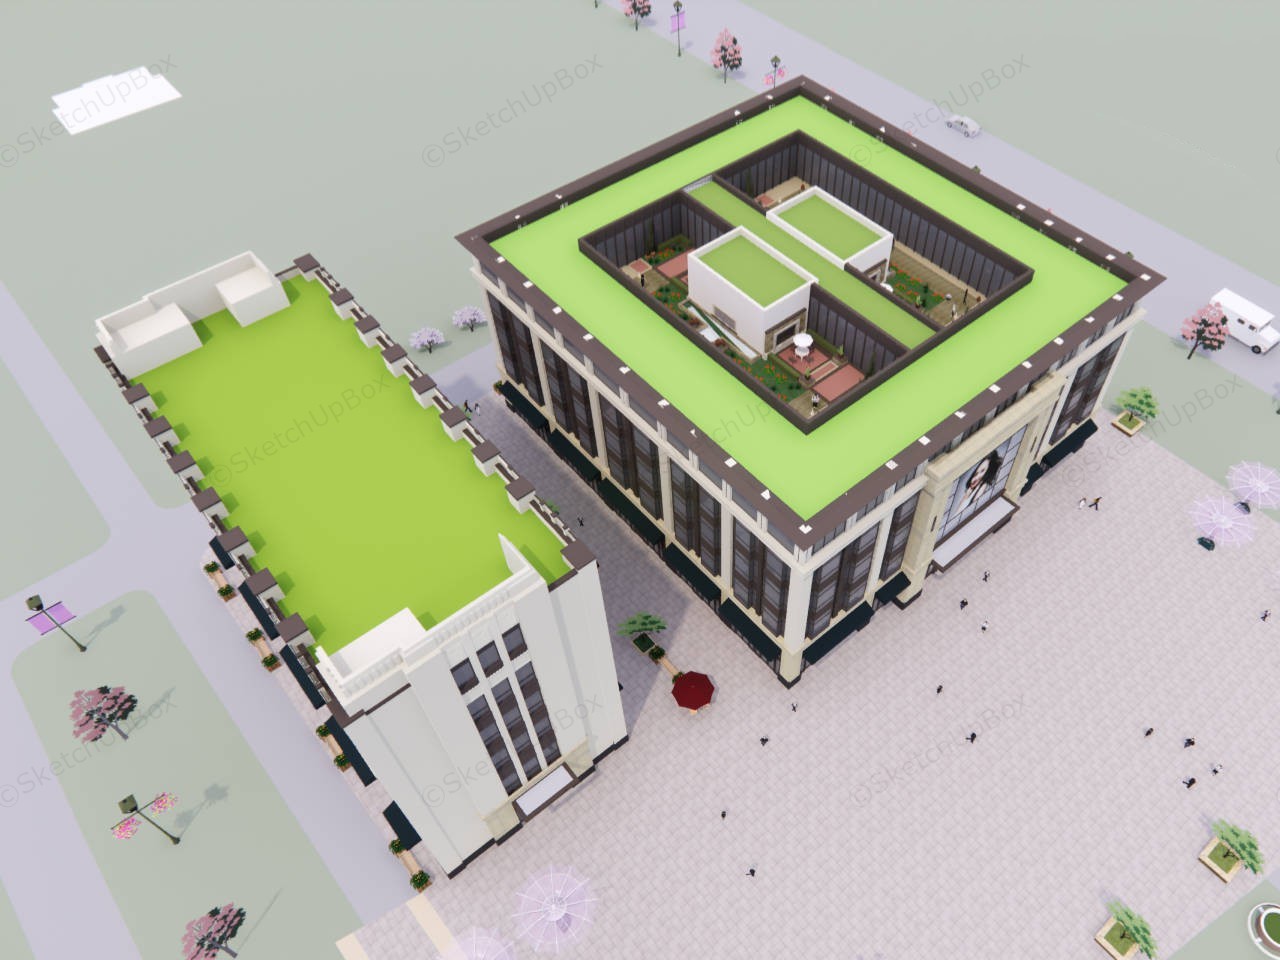 Commercial Complex Architecture Design sketchup model preview - SketchupBox